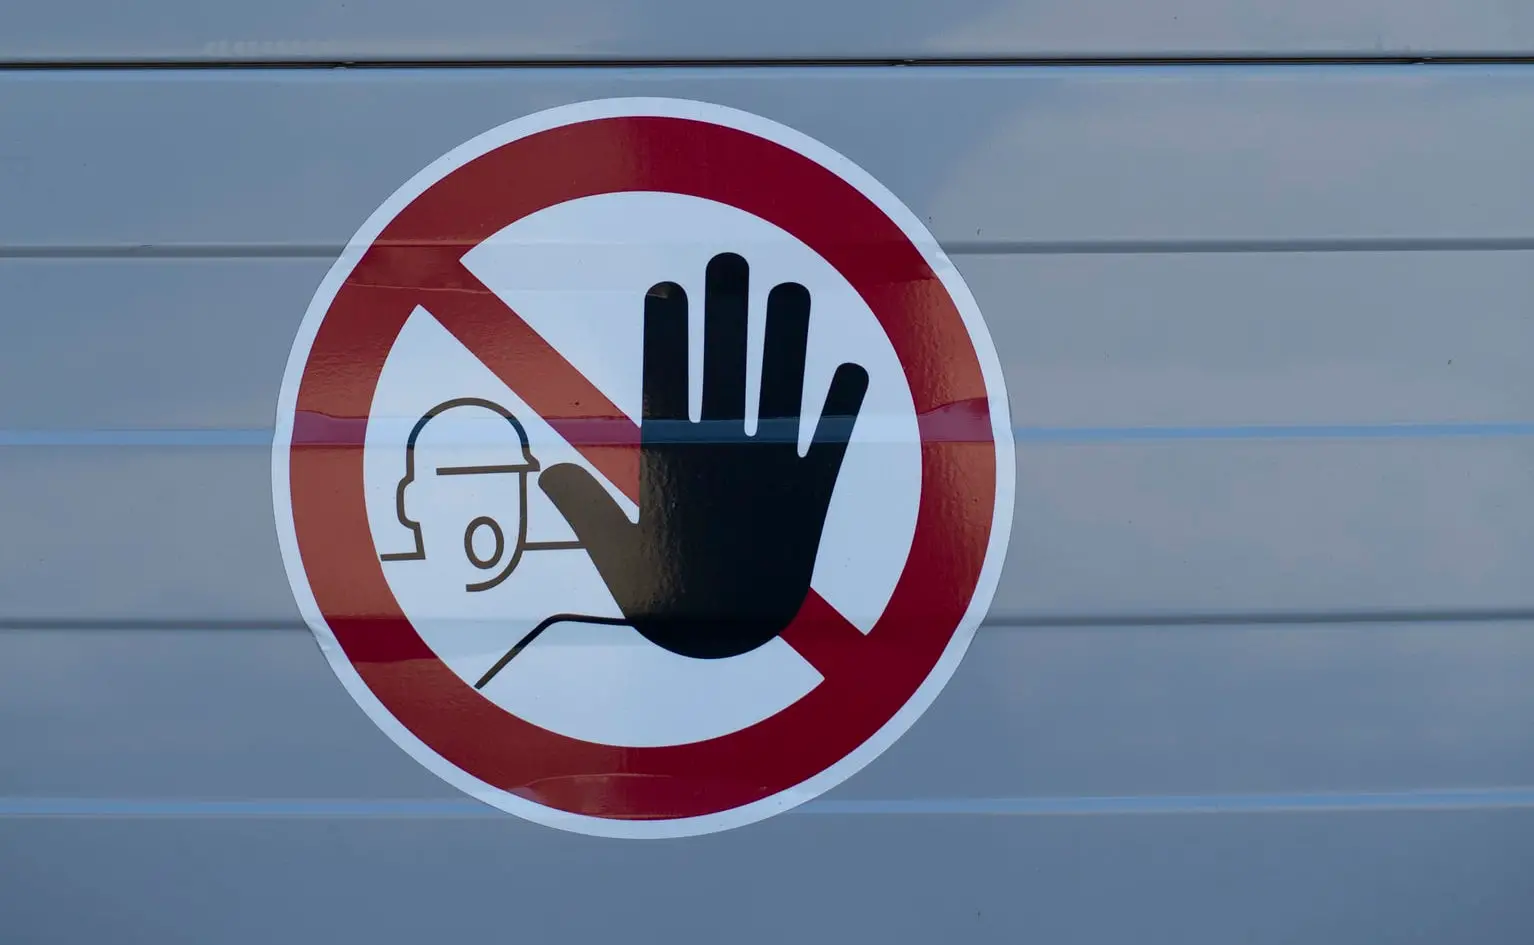 sticker on wall showing man with hand out signalling stop by Markus Spiske